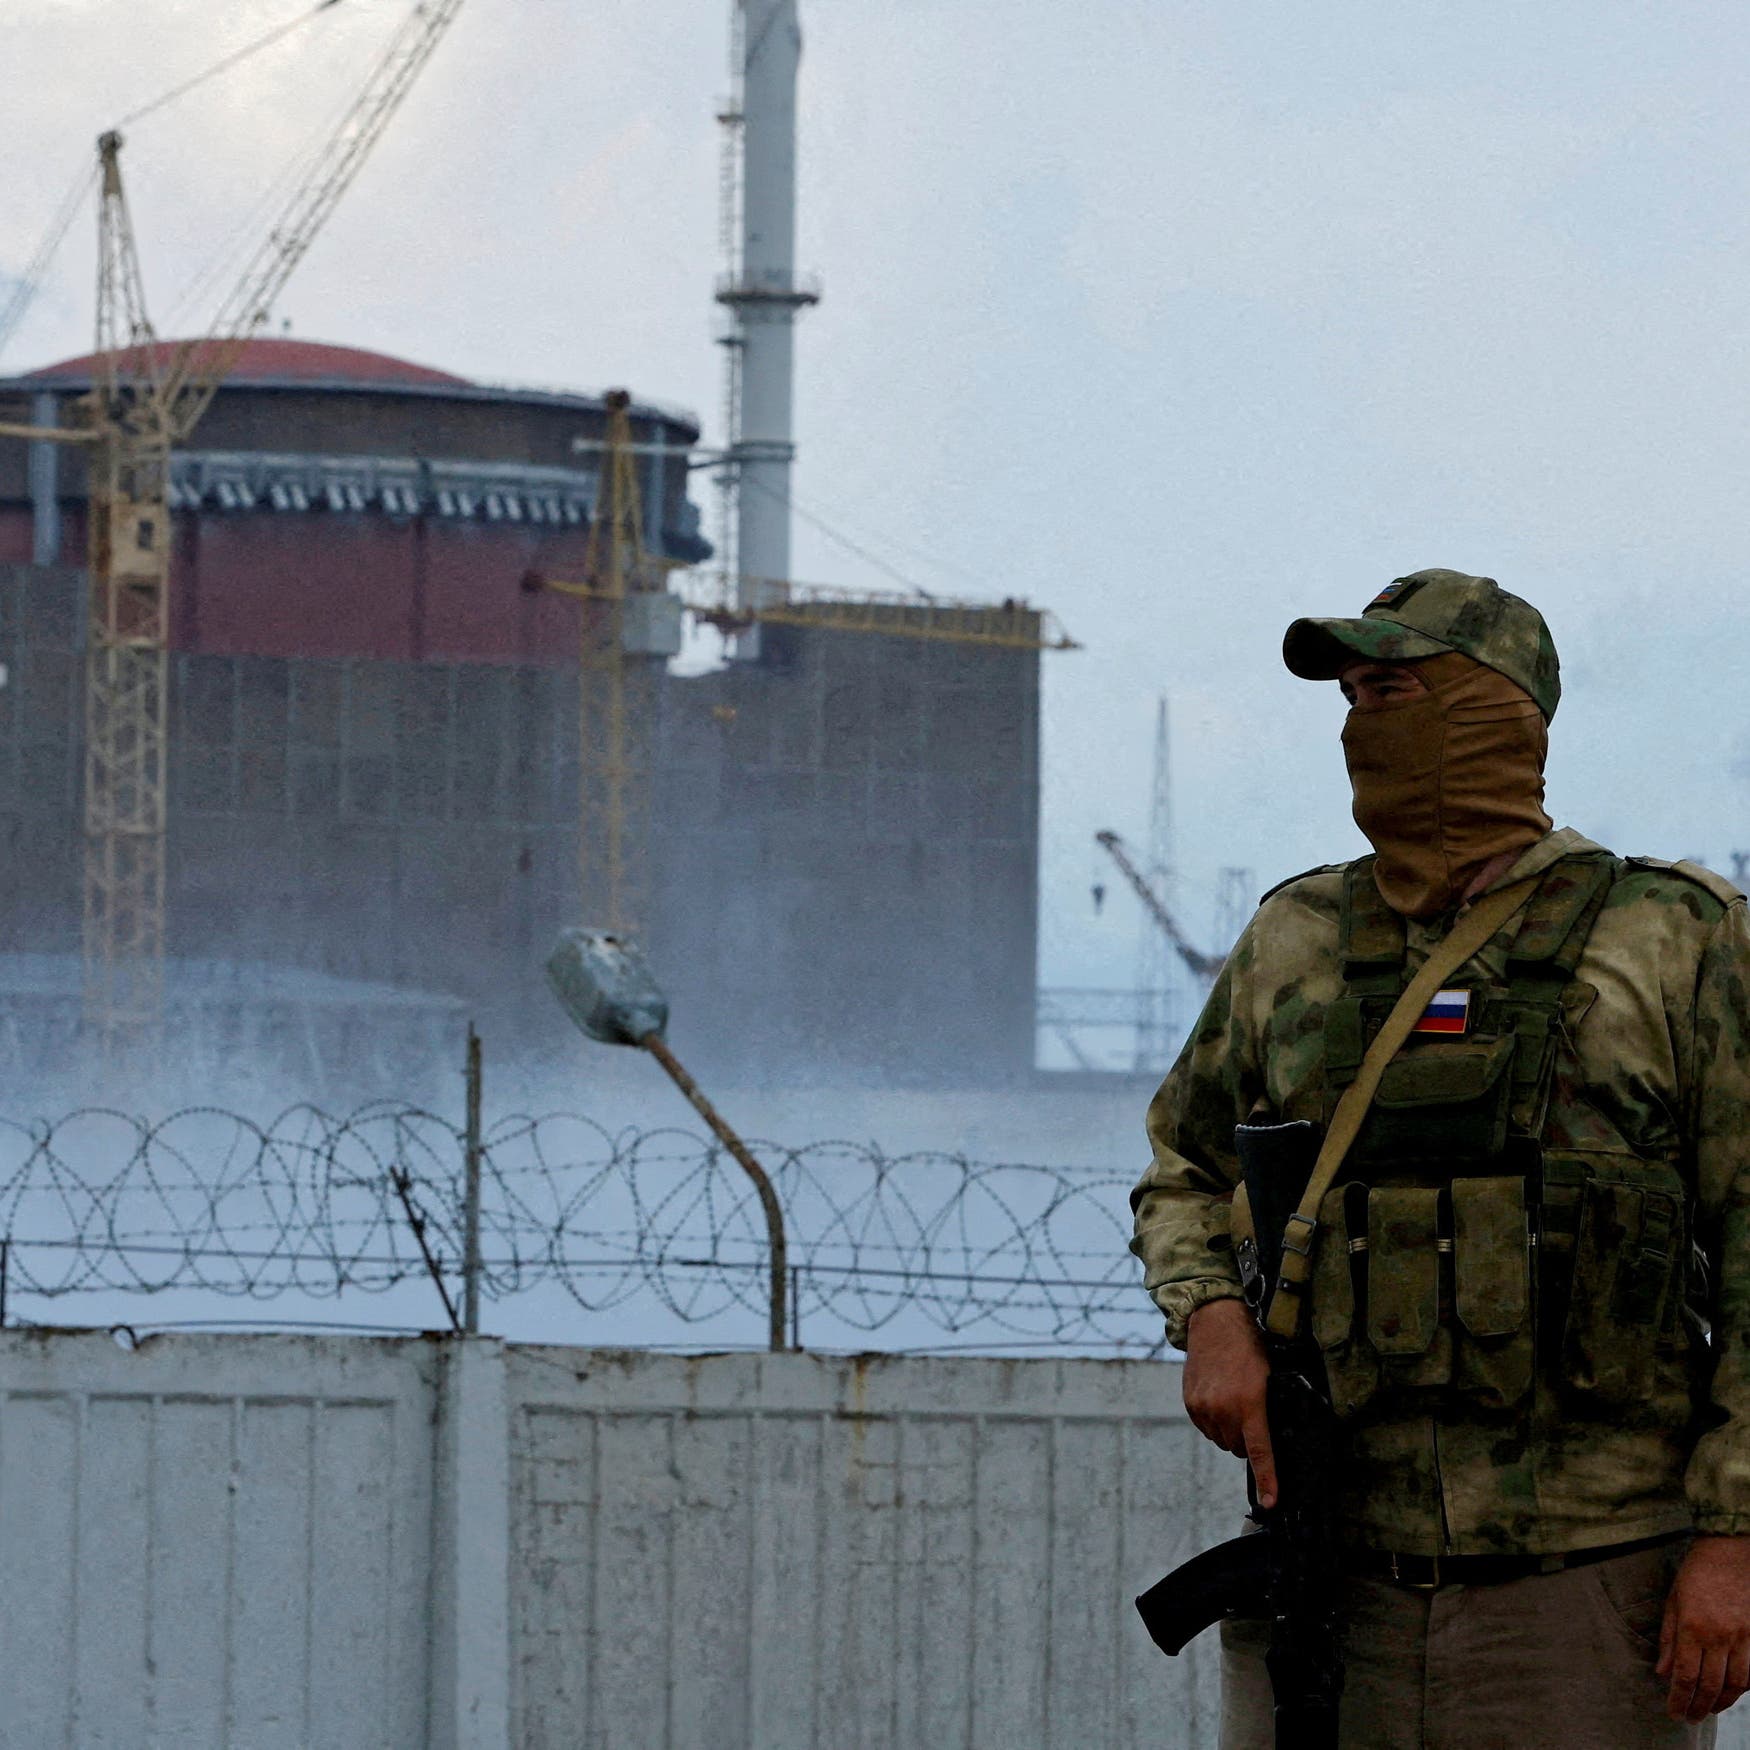 Explainer: What are the risks to Ukraine’s nuclear reactors in war